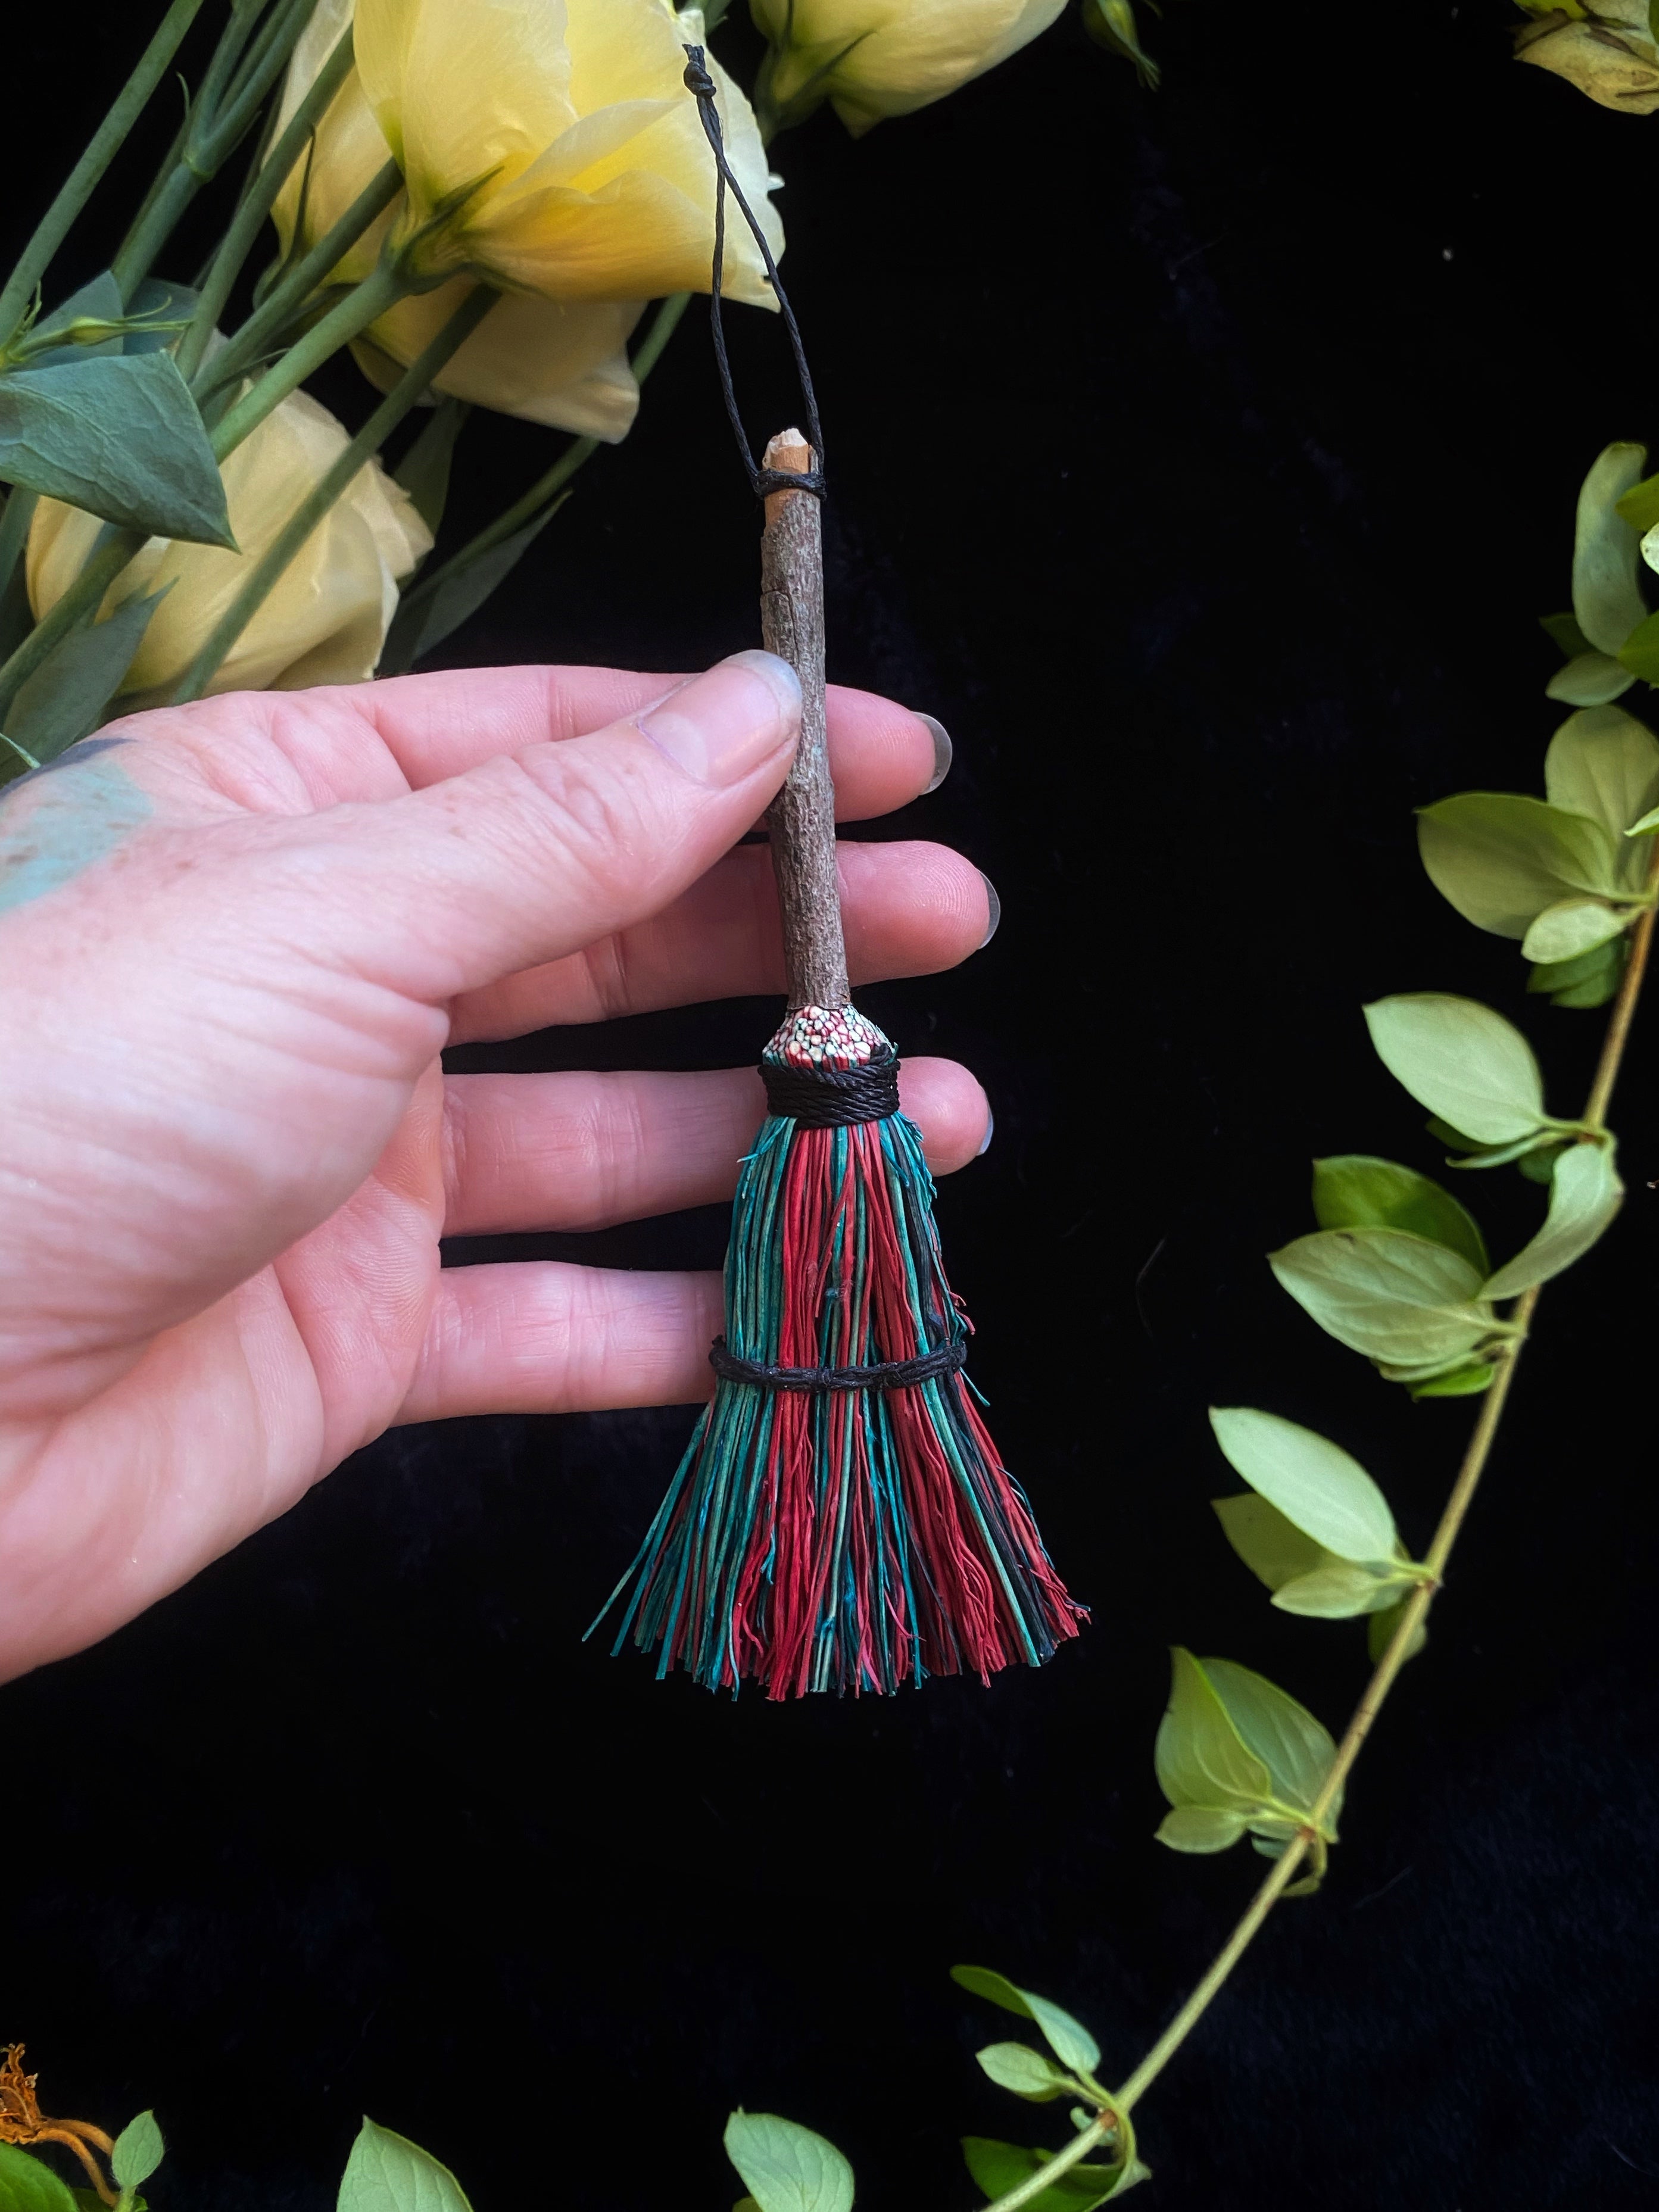 Miniature Besom/Sweeper Broom or Hand Brooms -3-5" Tampico -(functional or as an ornament)